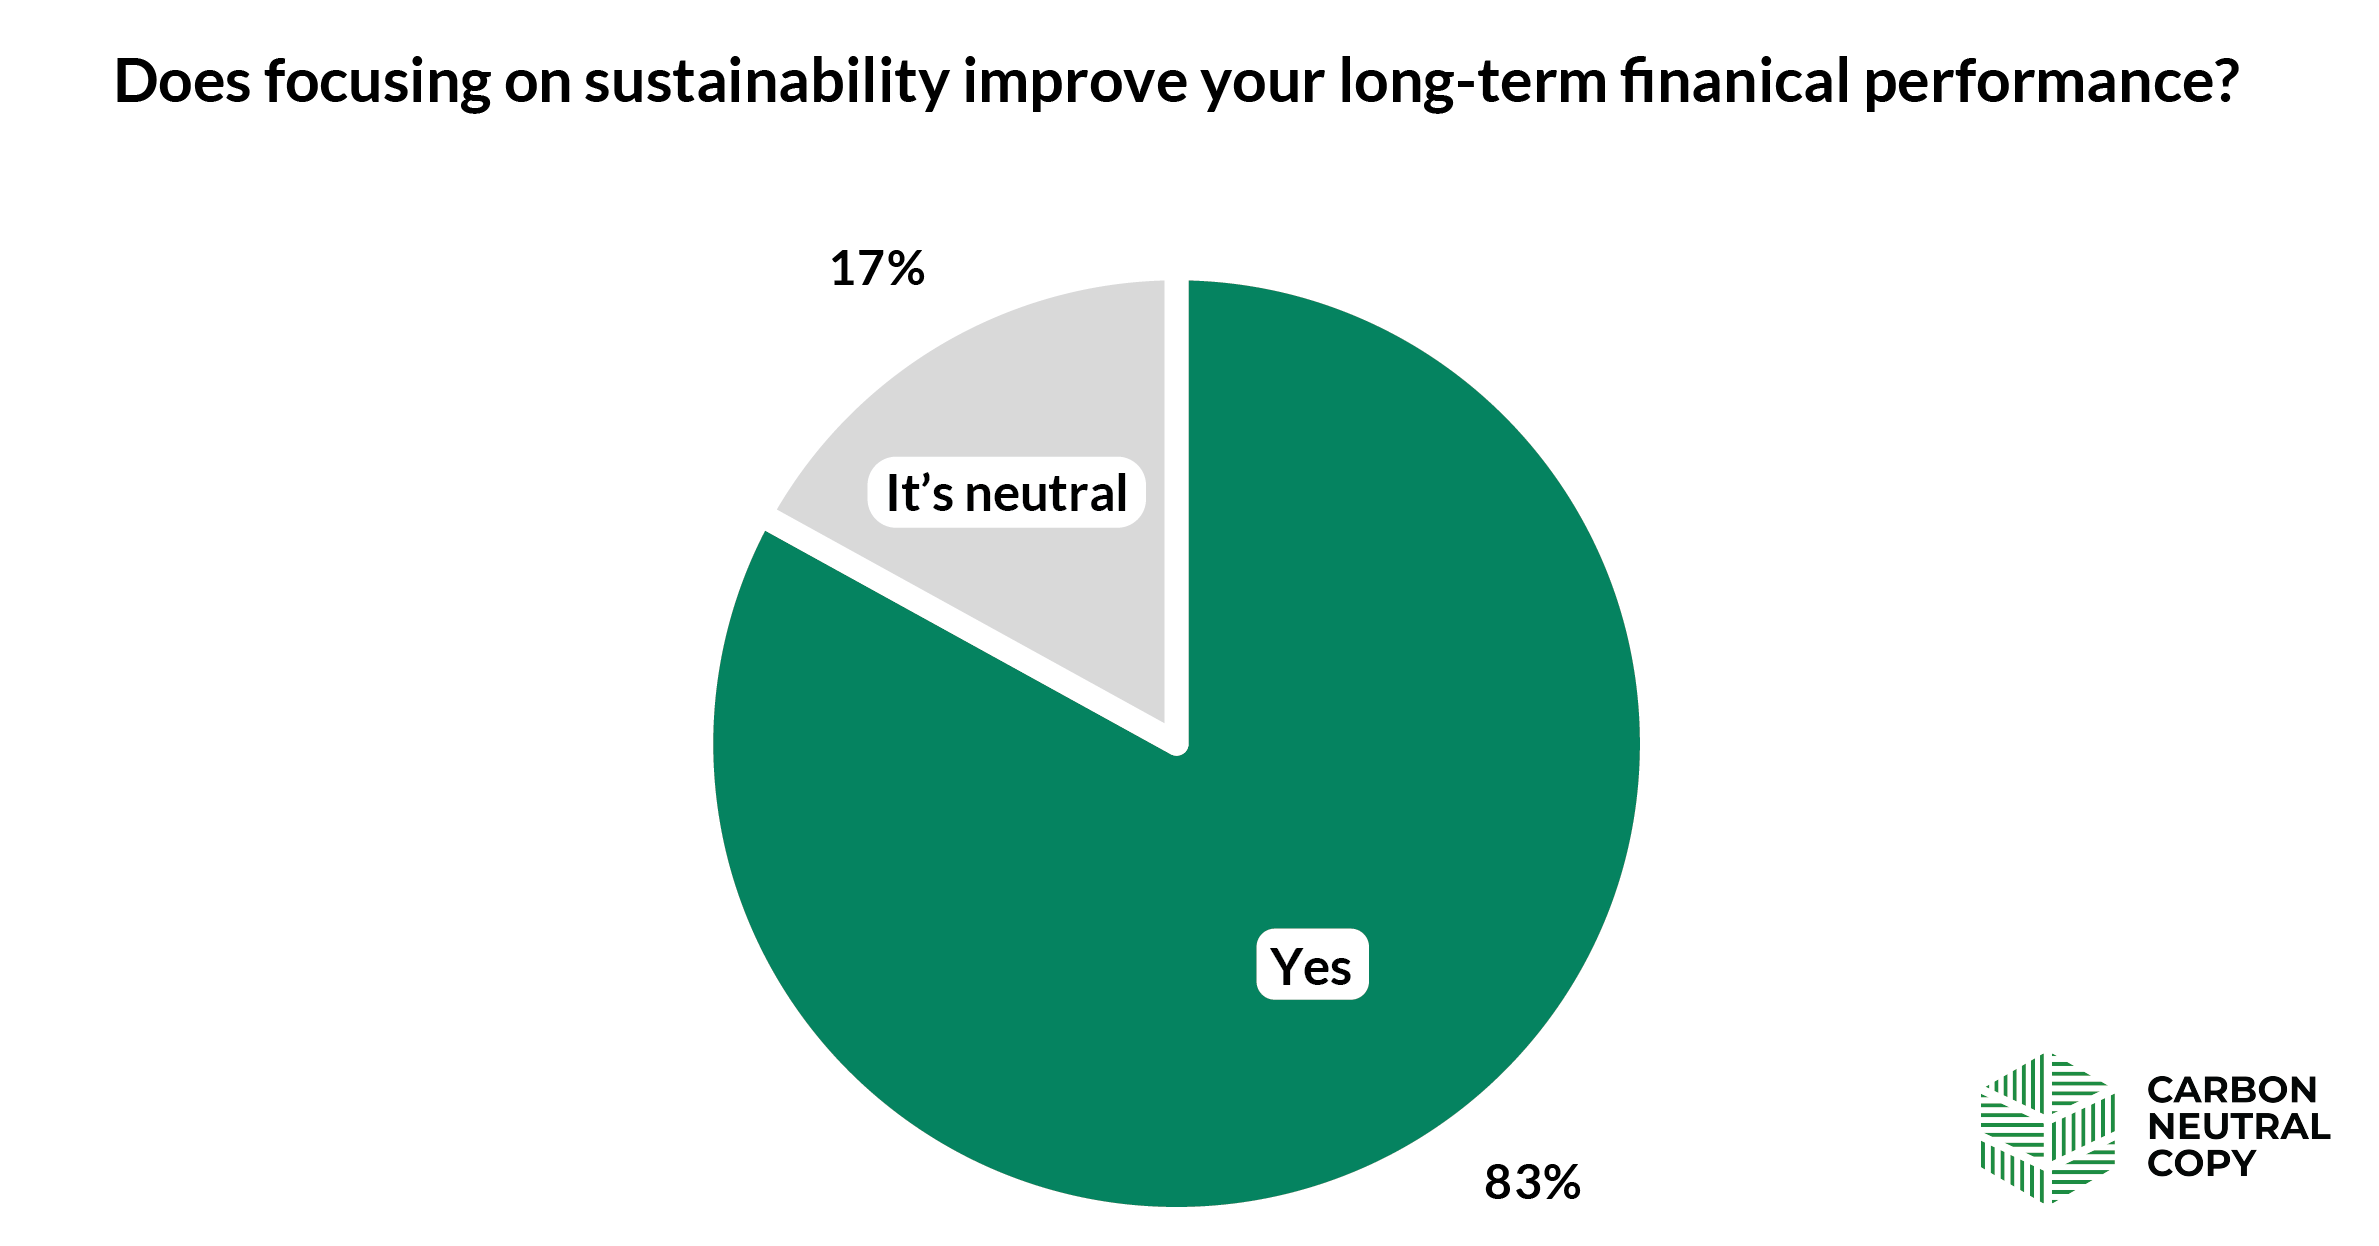 Survey chart showing that 83% think focusing on sustainability improves long-term financial performance